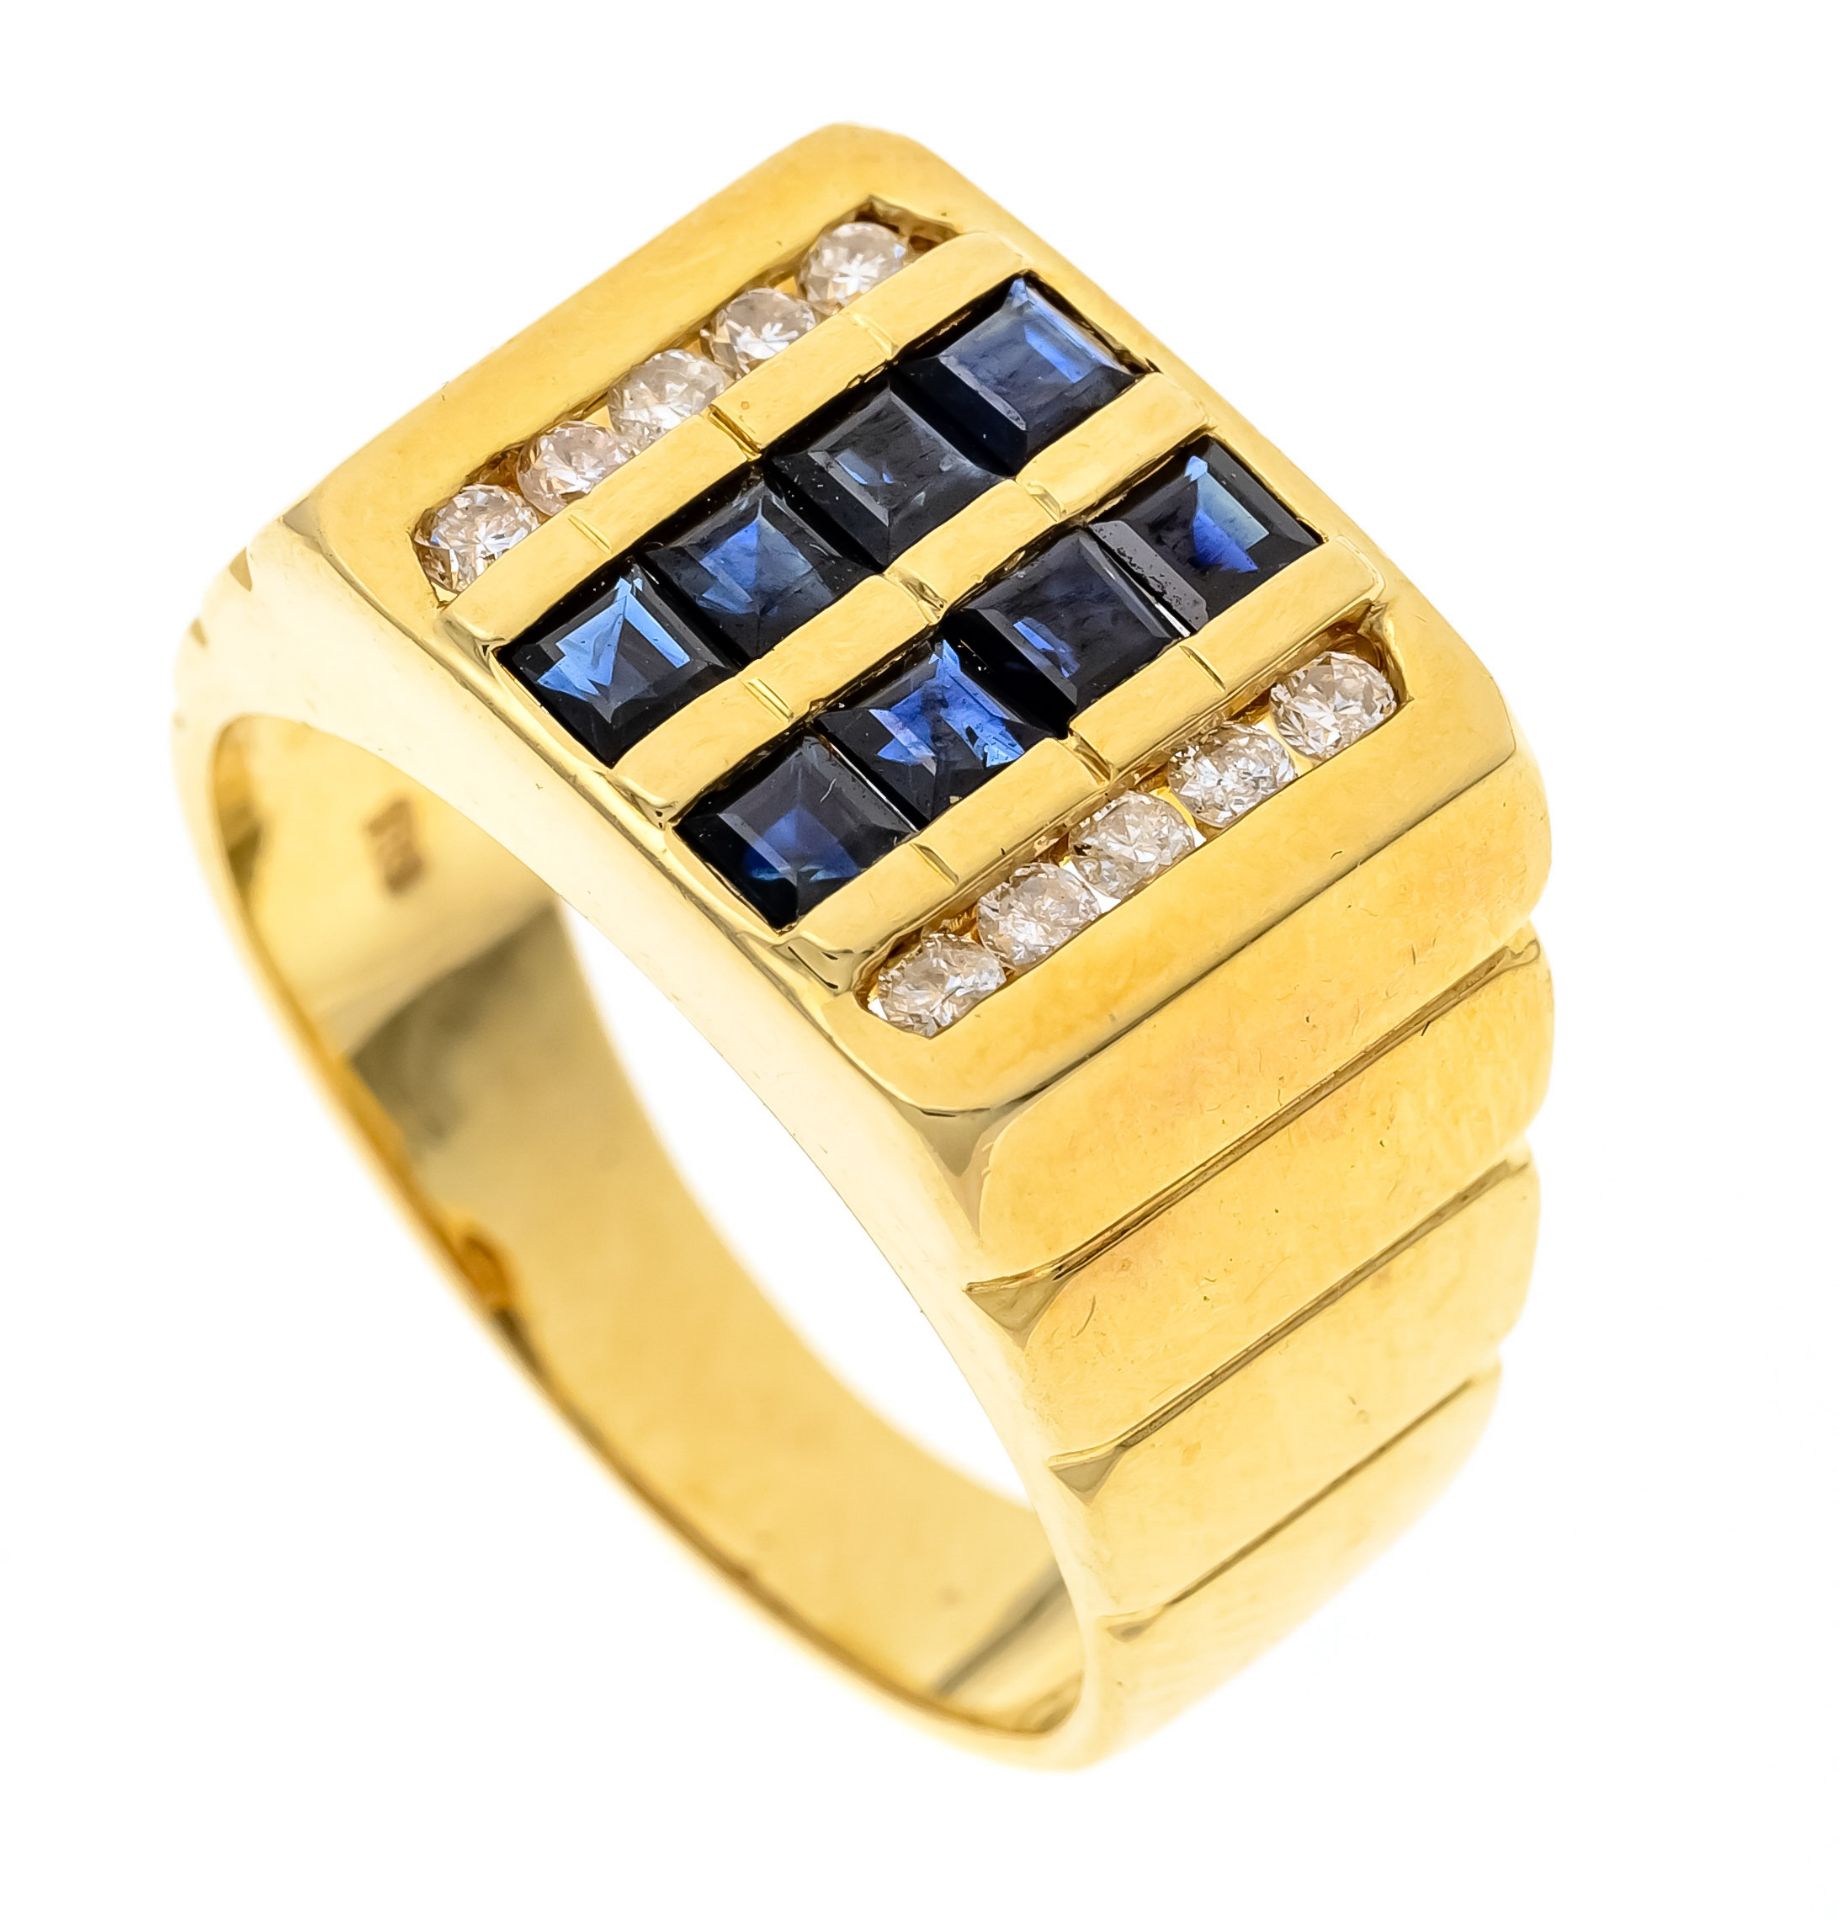 Sapphire diamond ring GG 585/000 with 8 faceted sapphire squares 2 mm and 10 brilliant-cut diamonds,